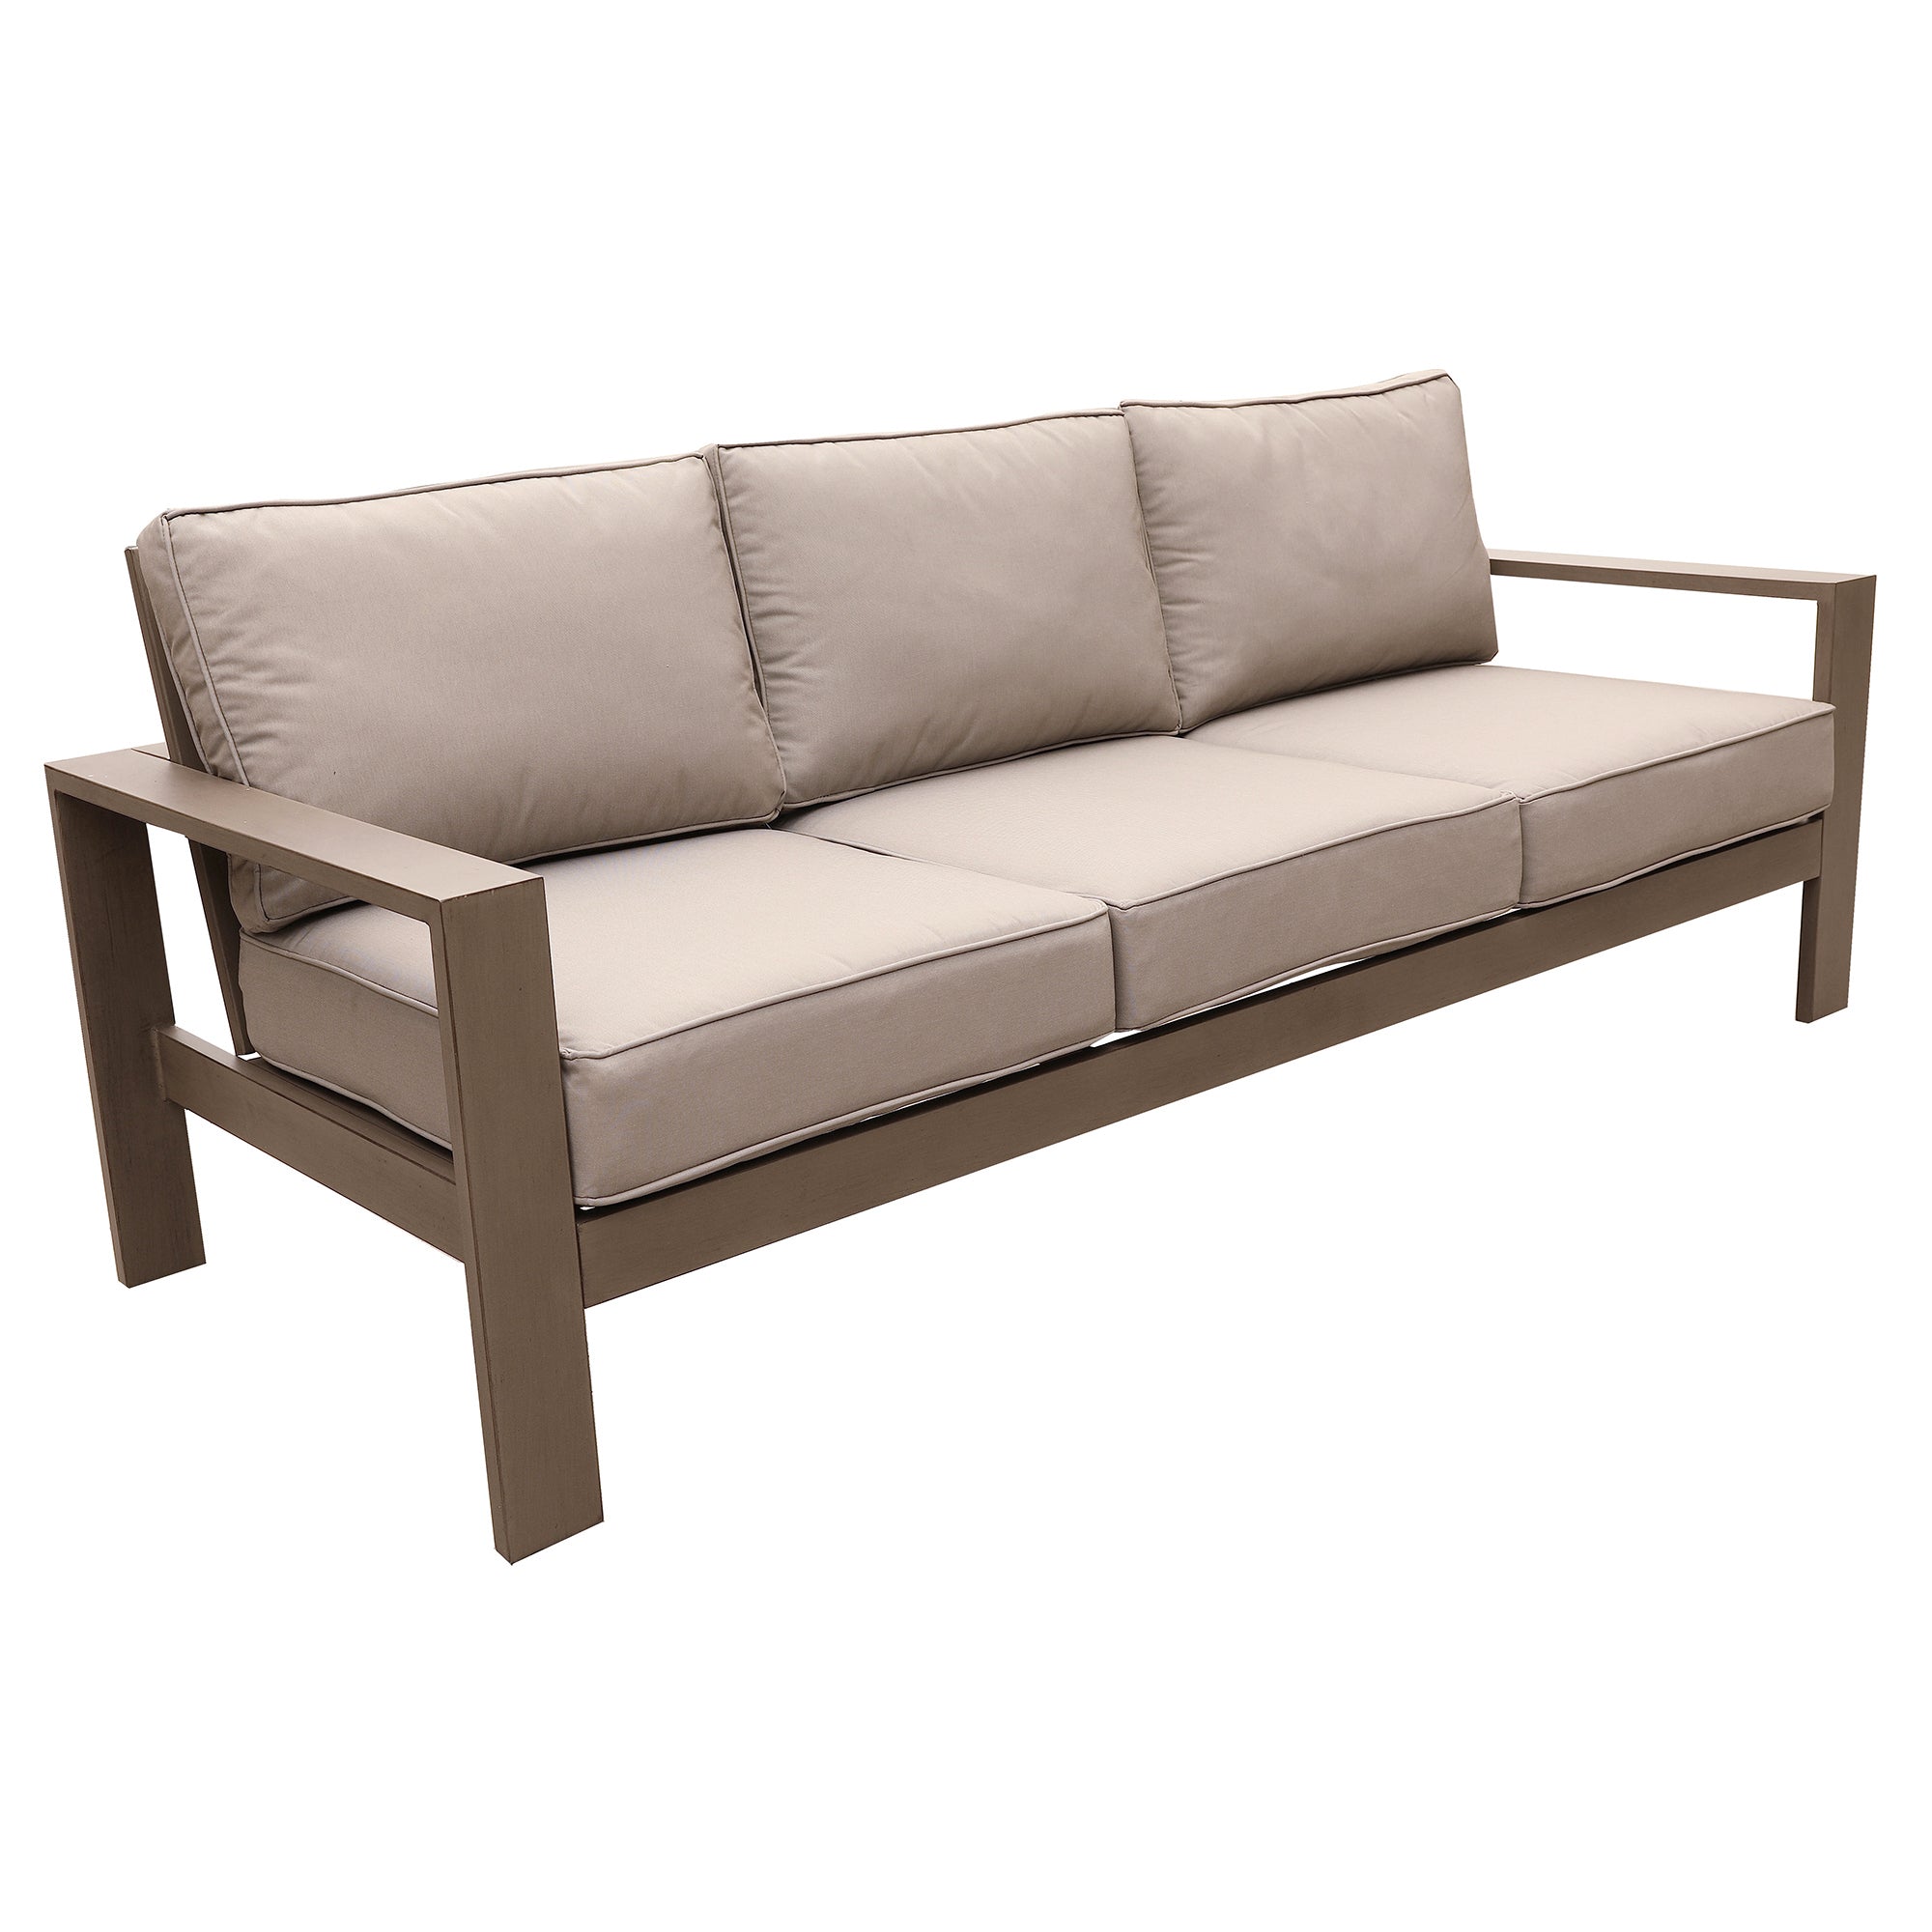 6 Piece Sofa Seating Group with Firepit table, Wood pewter-polyester-aluminum